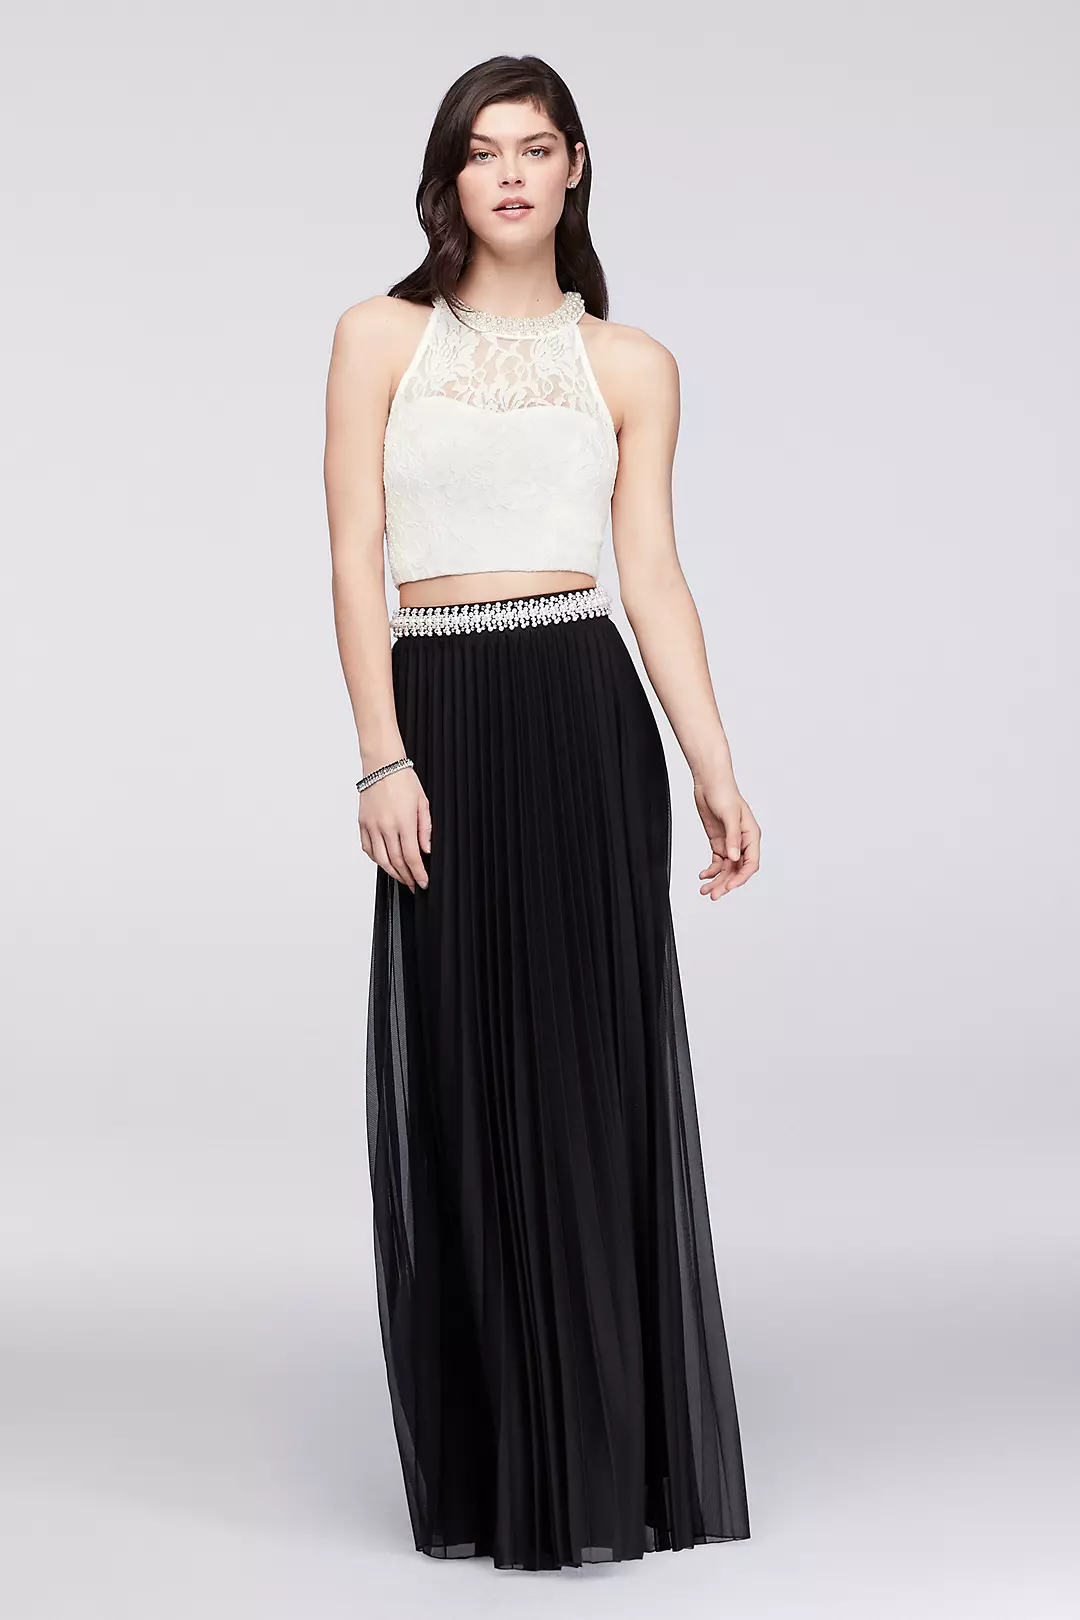 Lace Crop Top and Pleated Skirt Two-Piece Dress Image